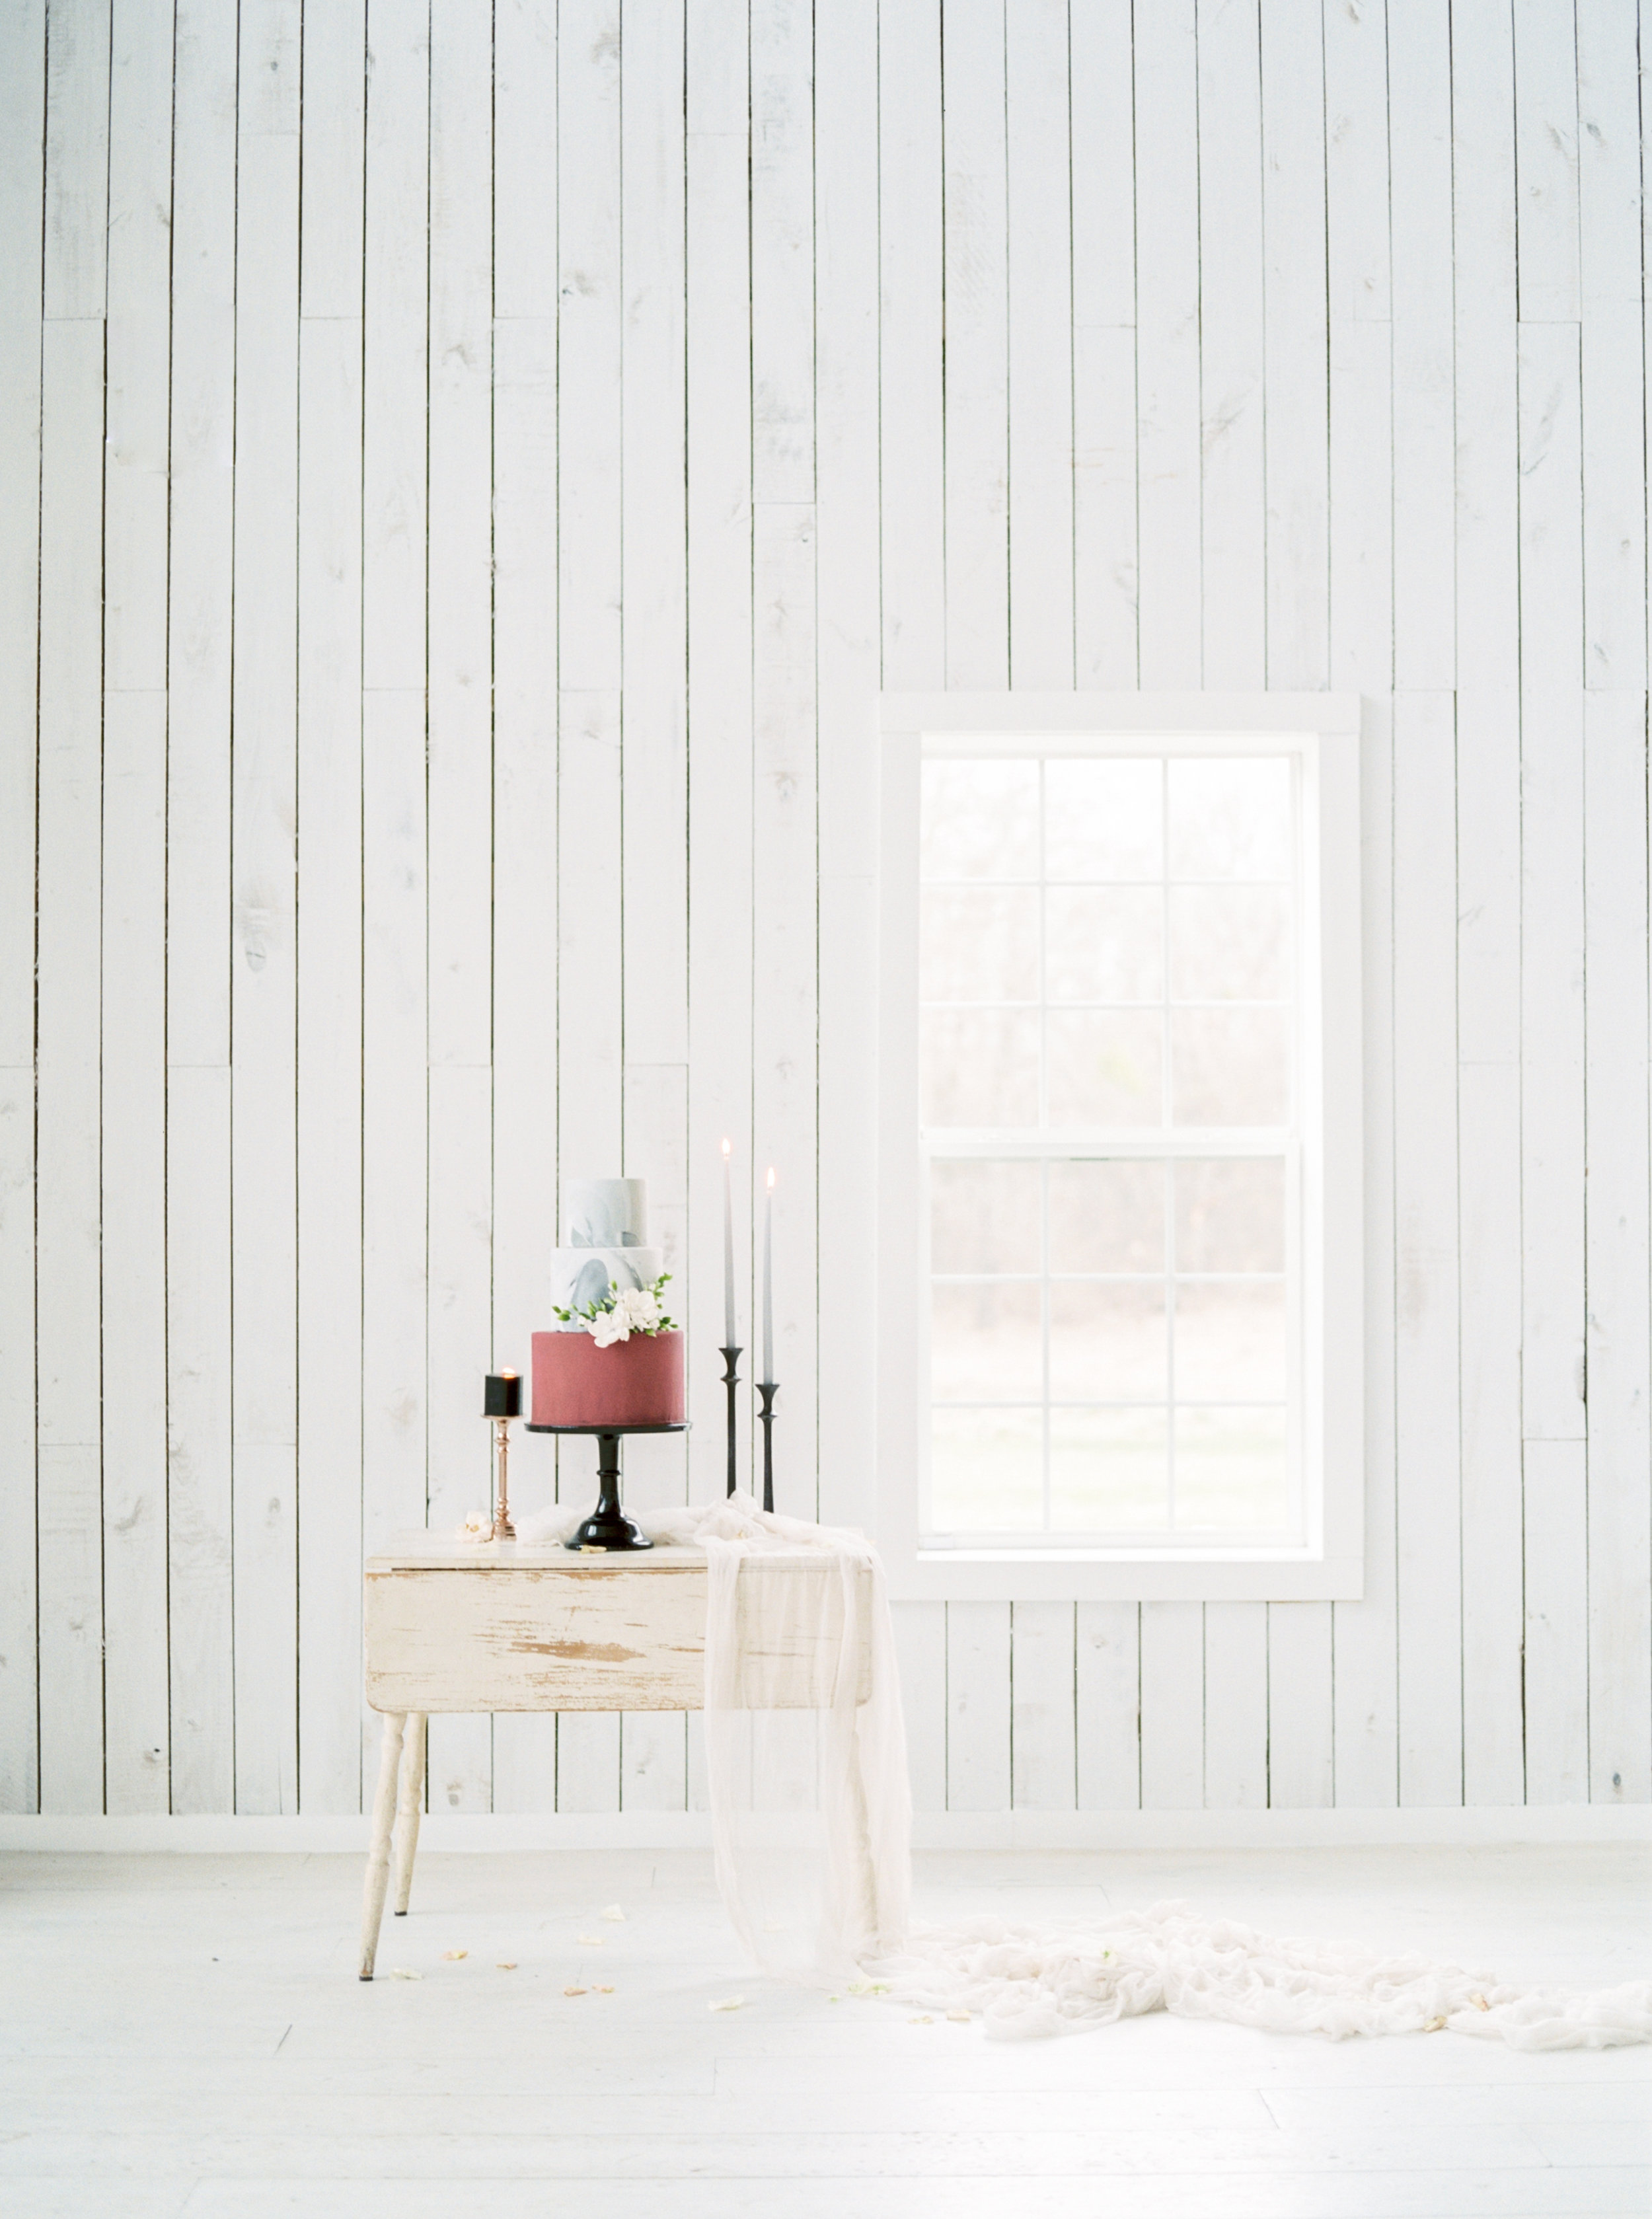 Callie Manion Photography_White Sparrow Open House_Styled Shoot_044.jpg